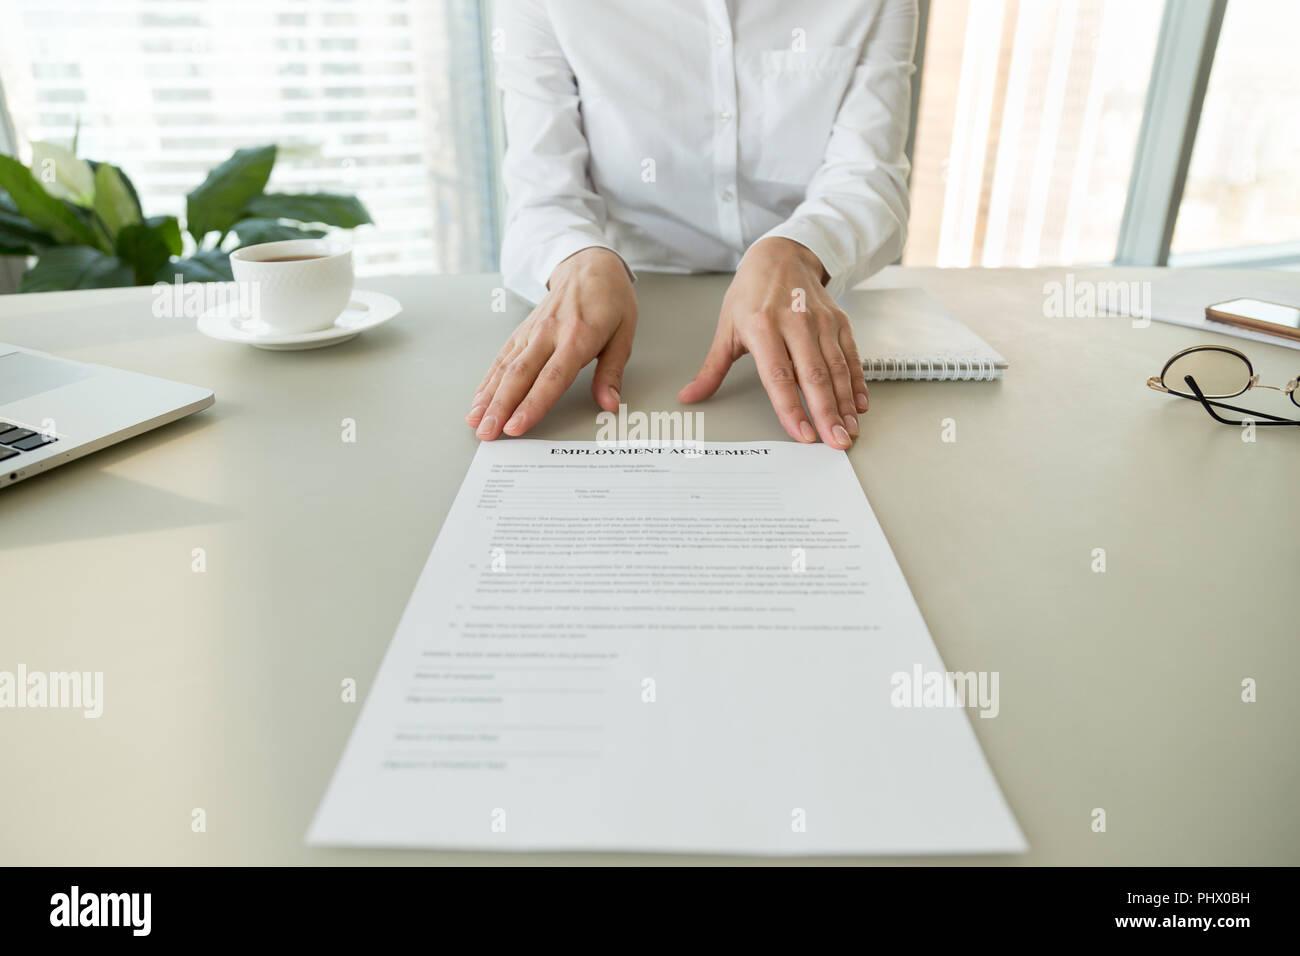 Female hr or employer offering employment agreement, close up vi Stock Photo